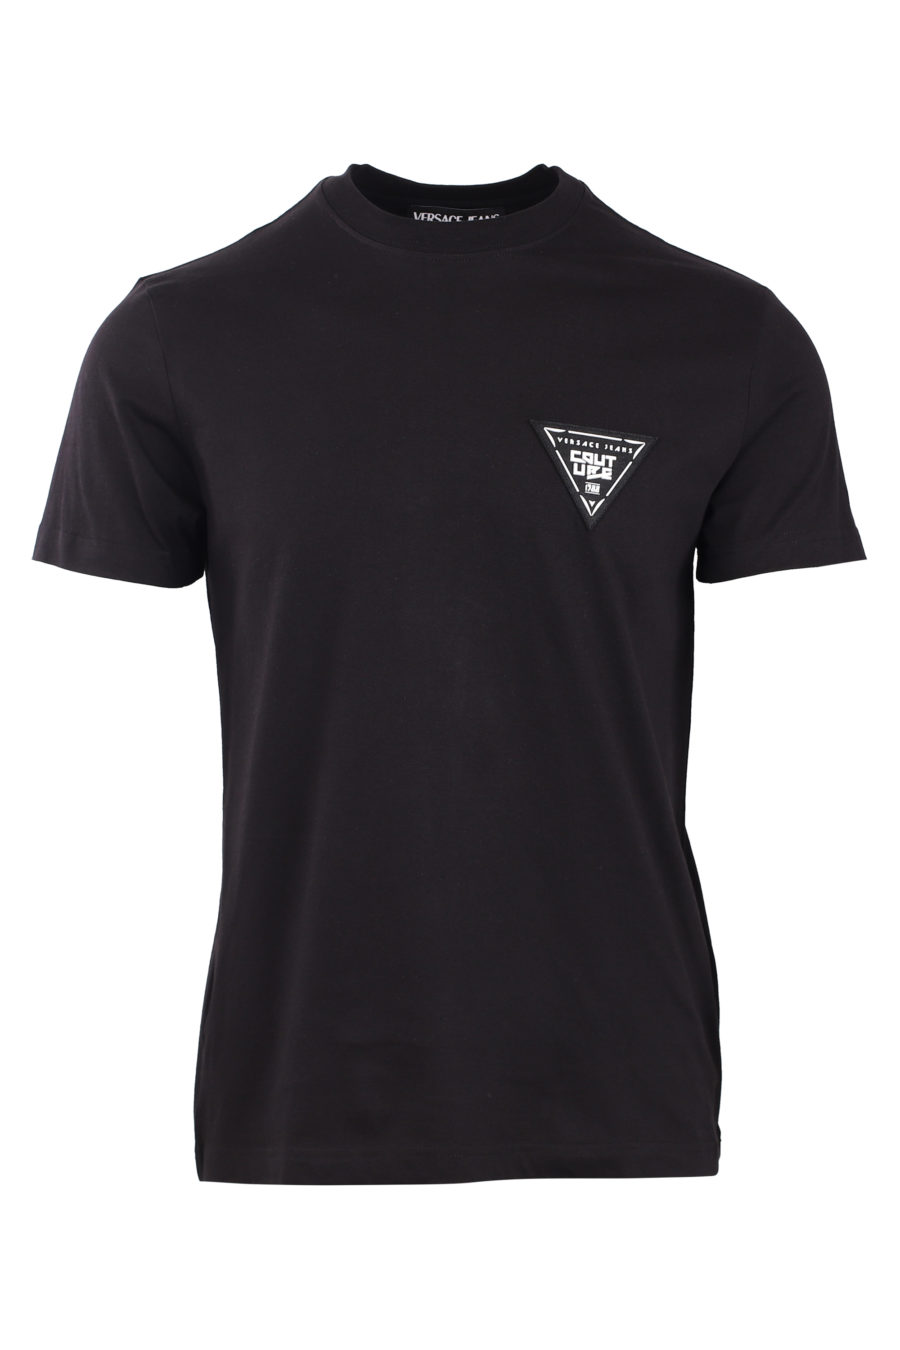 Black T-shirt with small triangle logo - IMG 0786